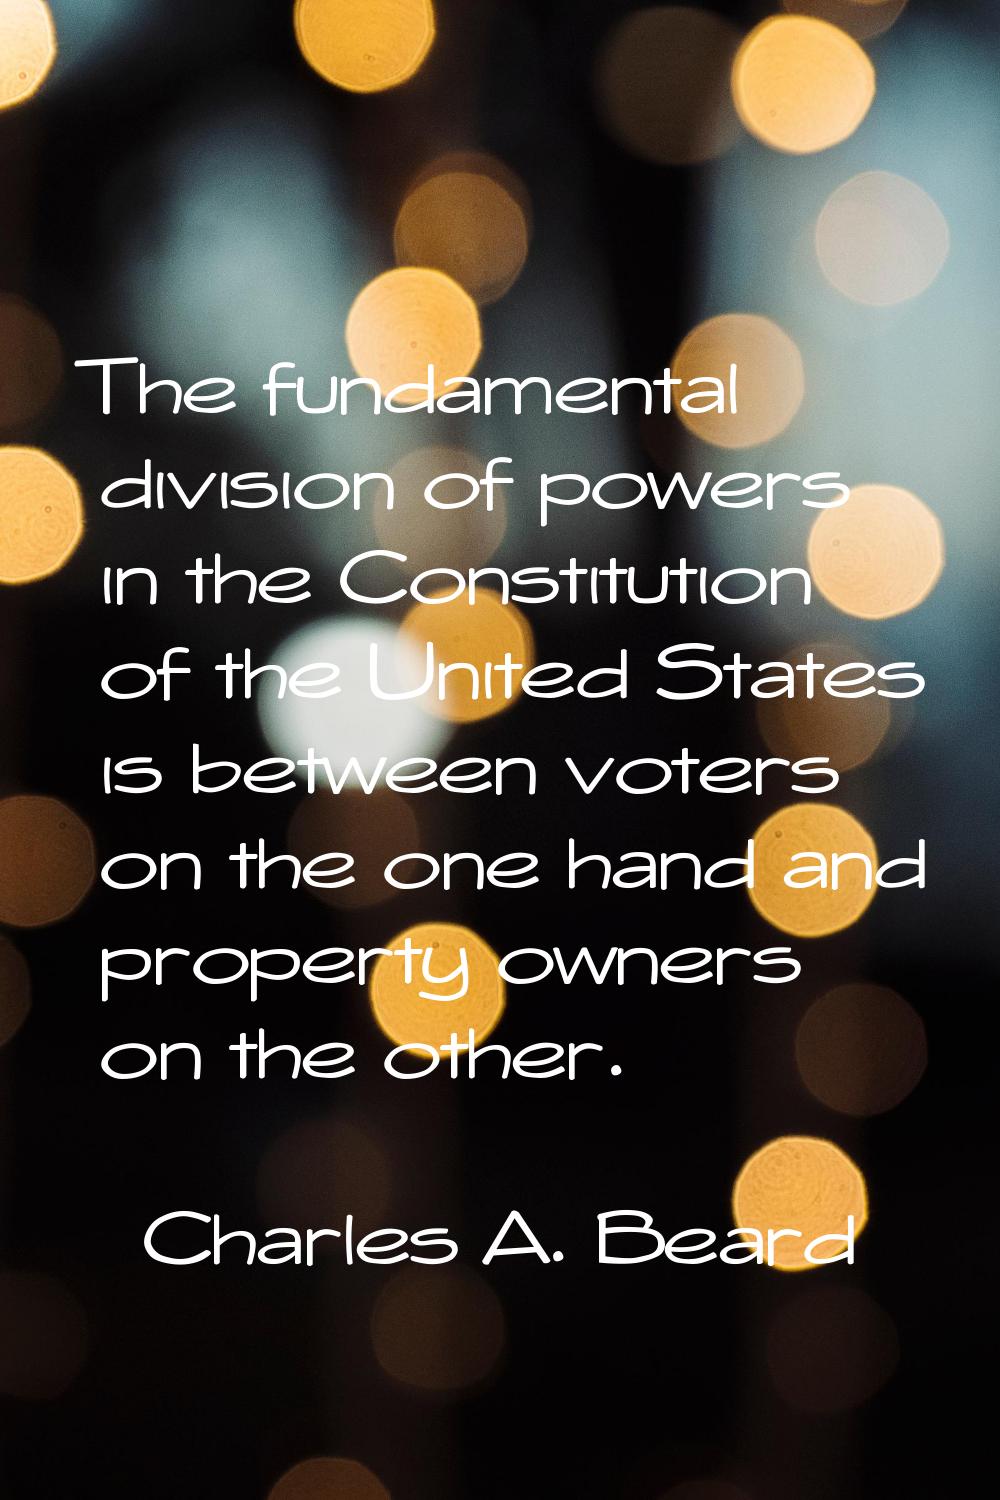 The fundamental division of powers in the Constitution of the United States is between voters on th